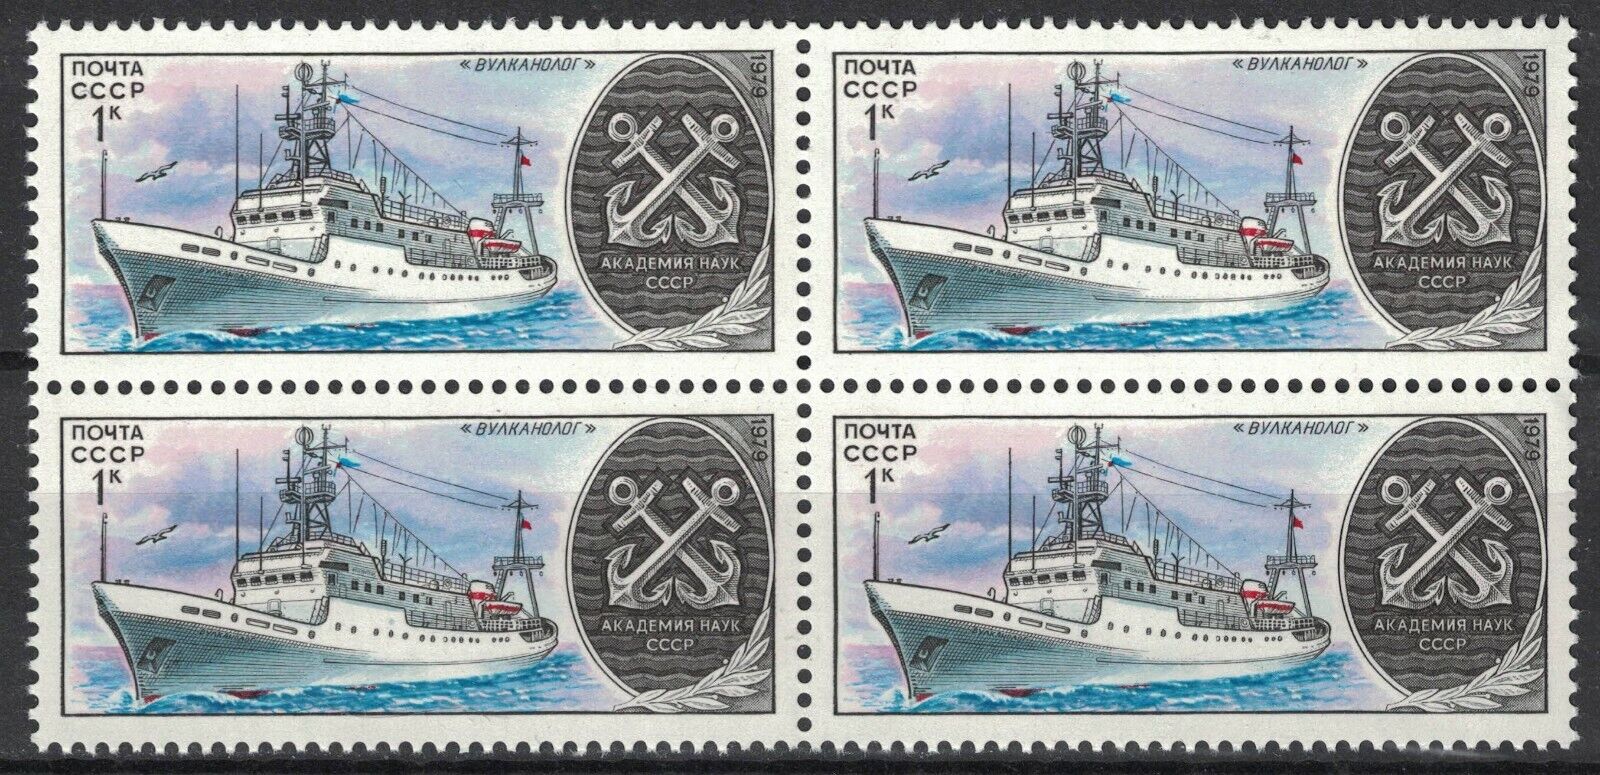 RUSSIA,USSR:1979 SC#4799 block of 4 MNH Research Ship 